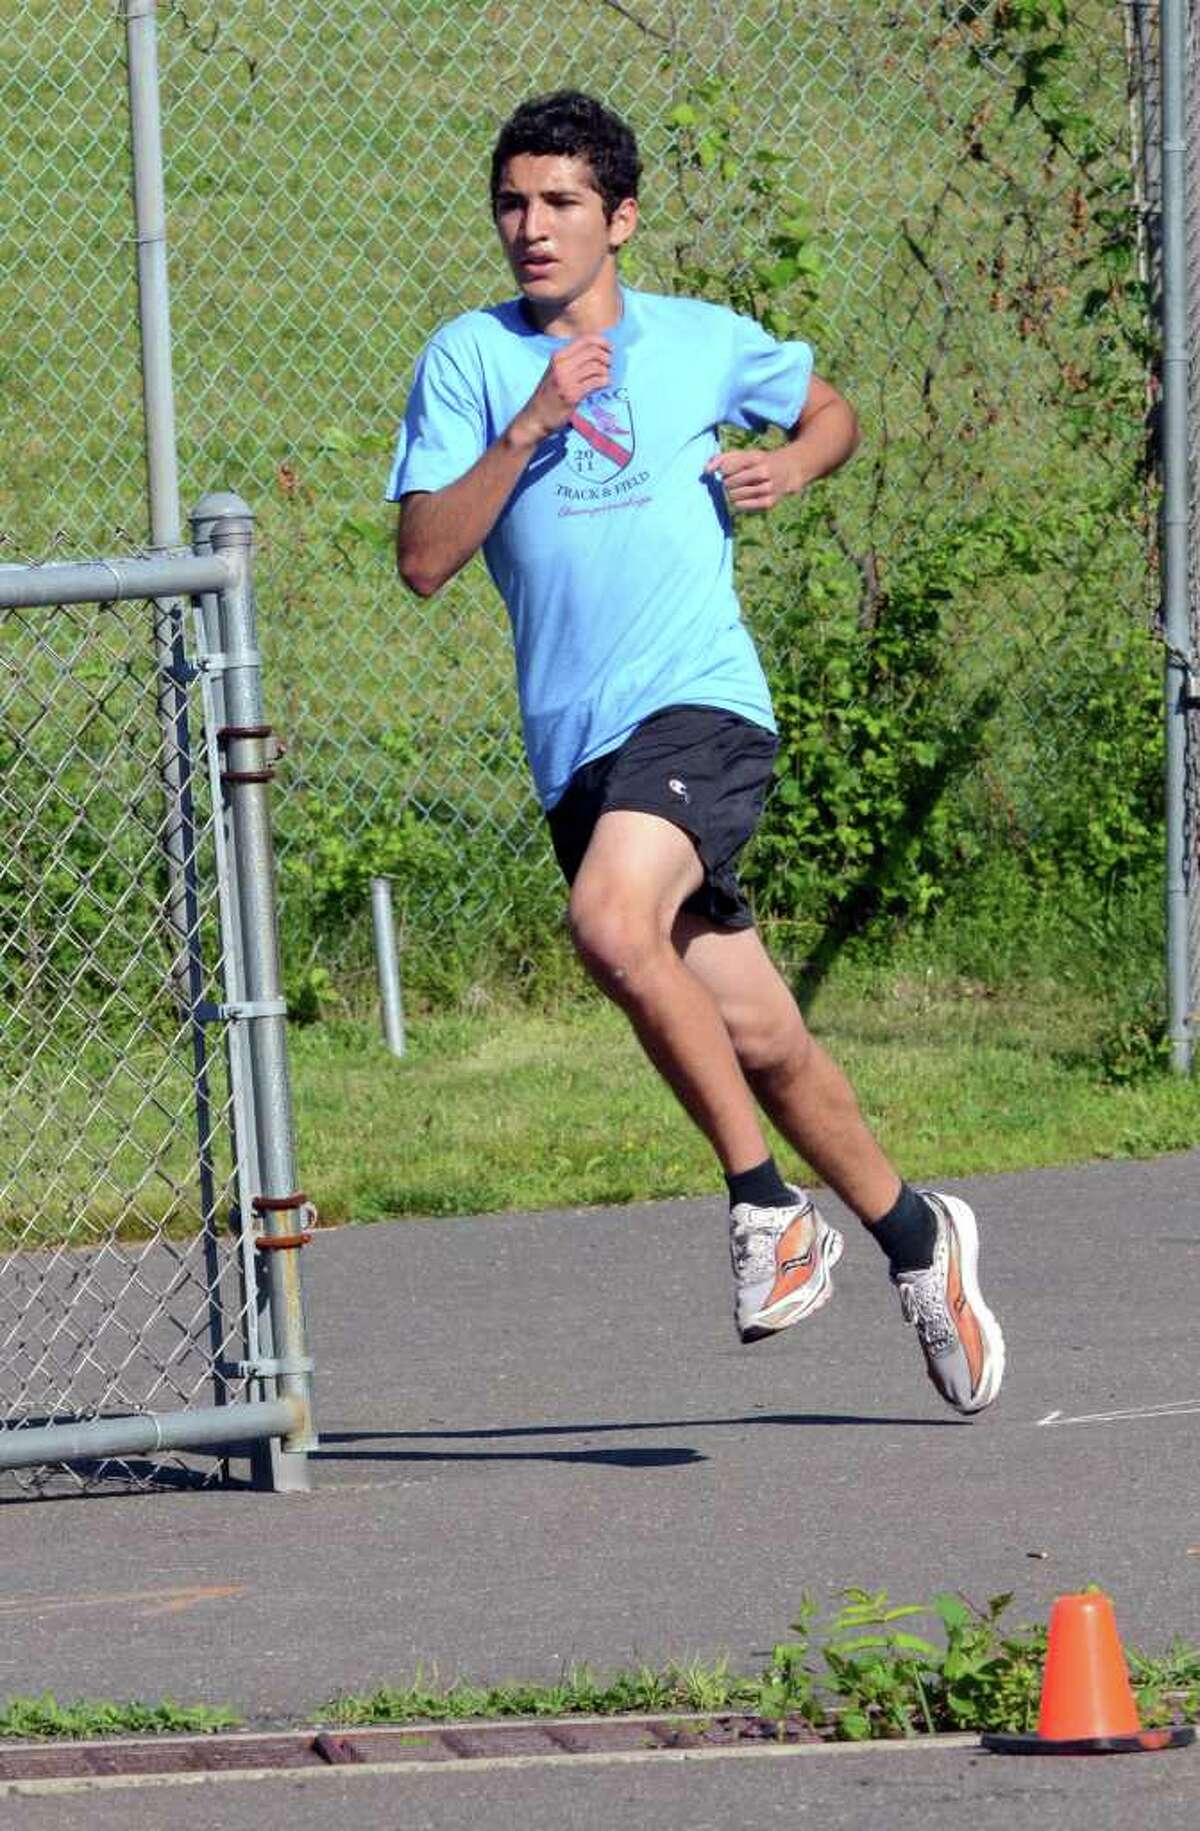 Edwin Rosales, 16, of Norwalk, races to the finish line during the first race in the Westport Road Runners Summer Series on Saturday, July 2, 2011. Rosales, a junior at Norwalk High School, placed first for the men completing the course in 12:29.